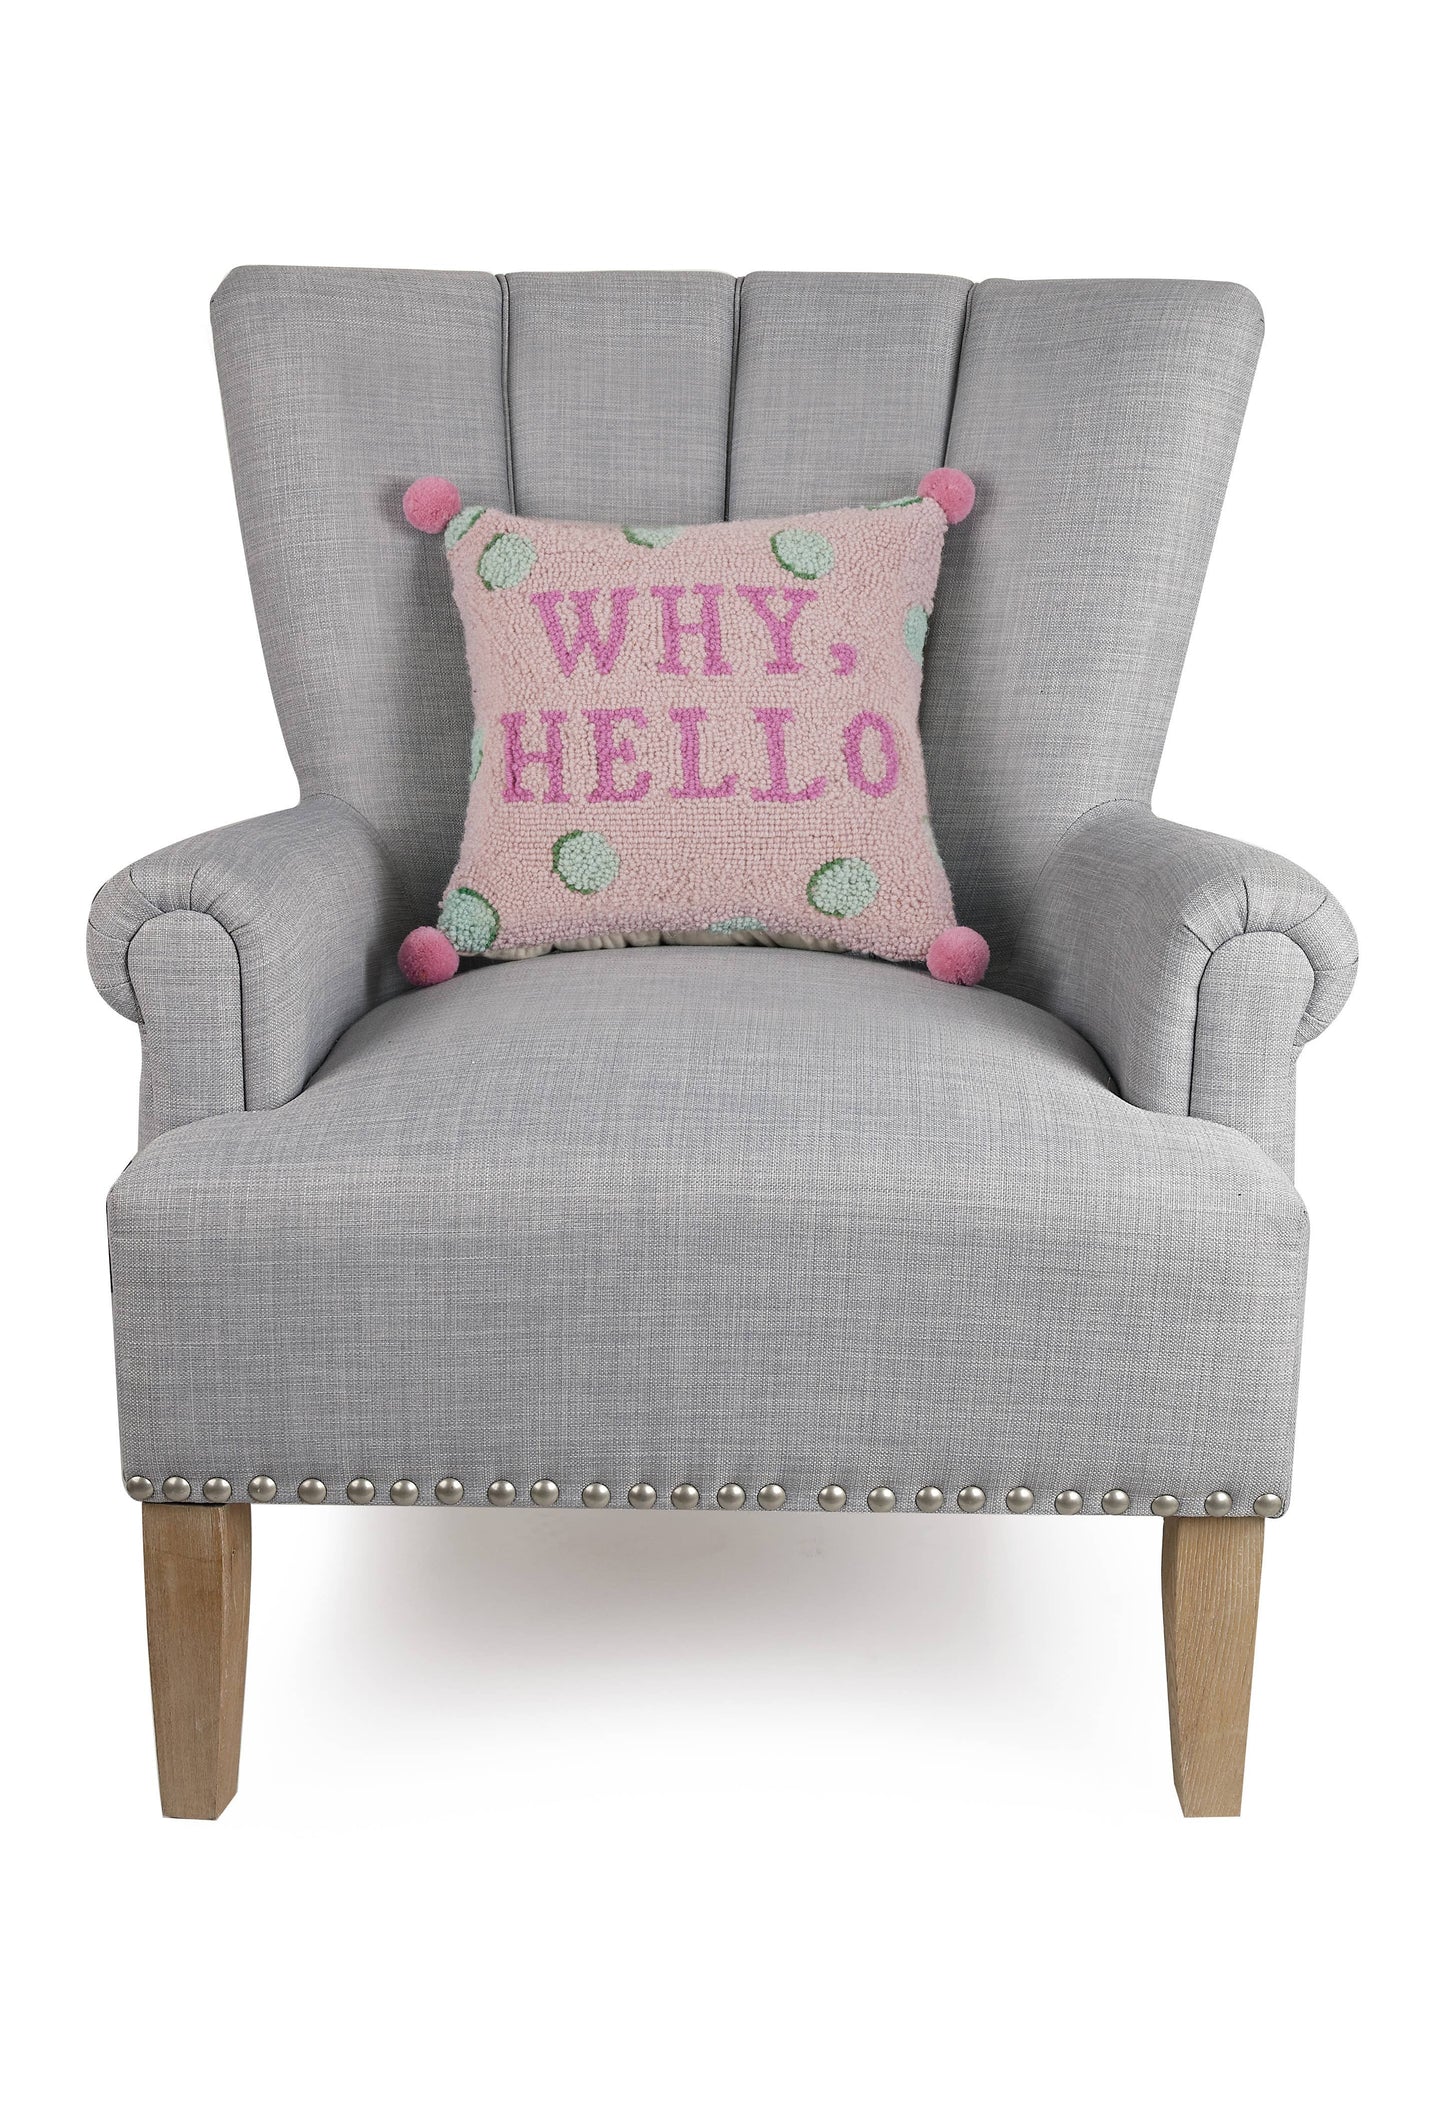 Why Hello w/Pom Poms Hook Pillow